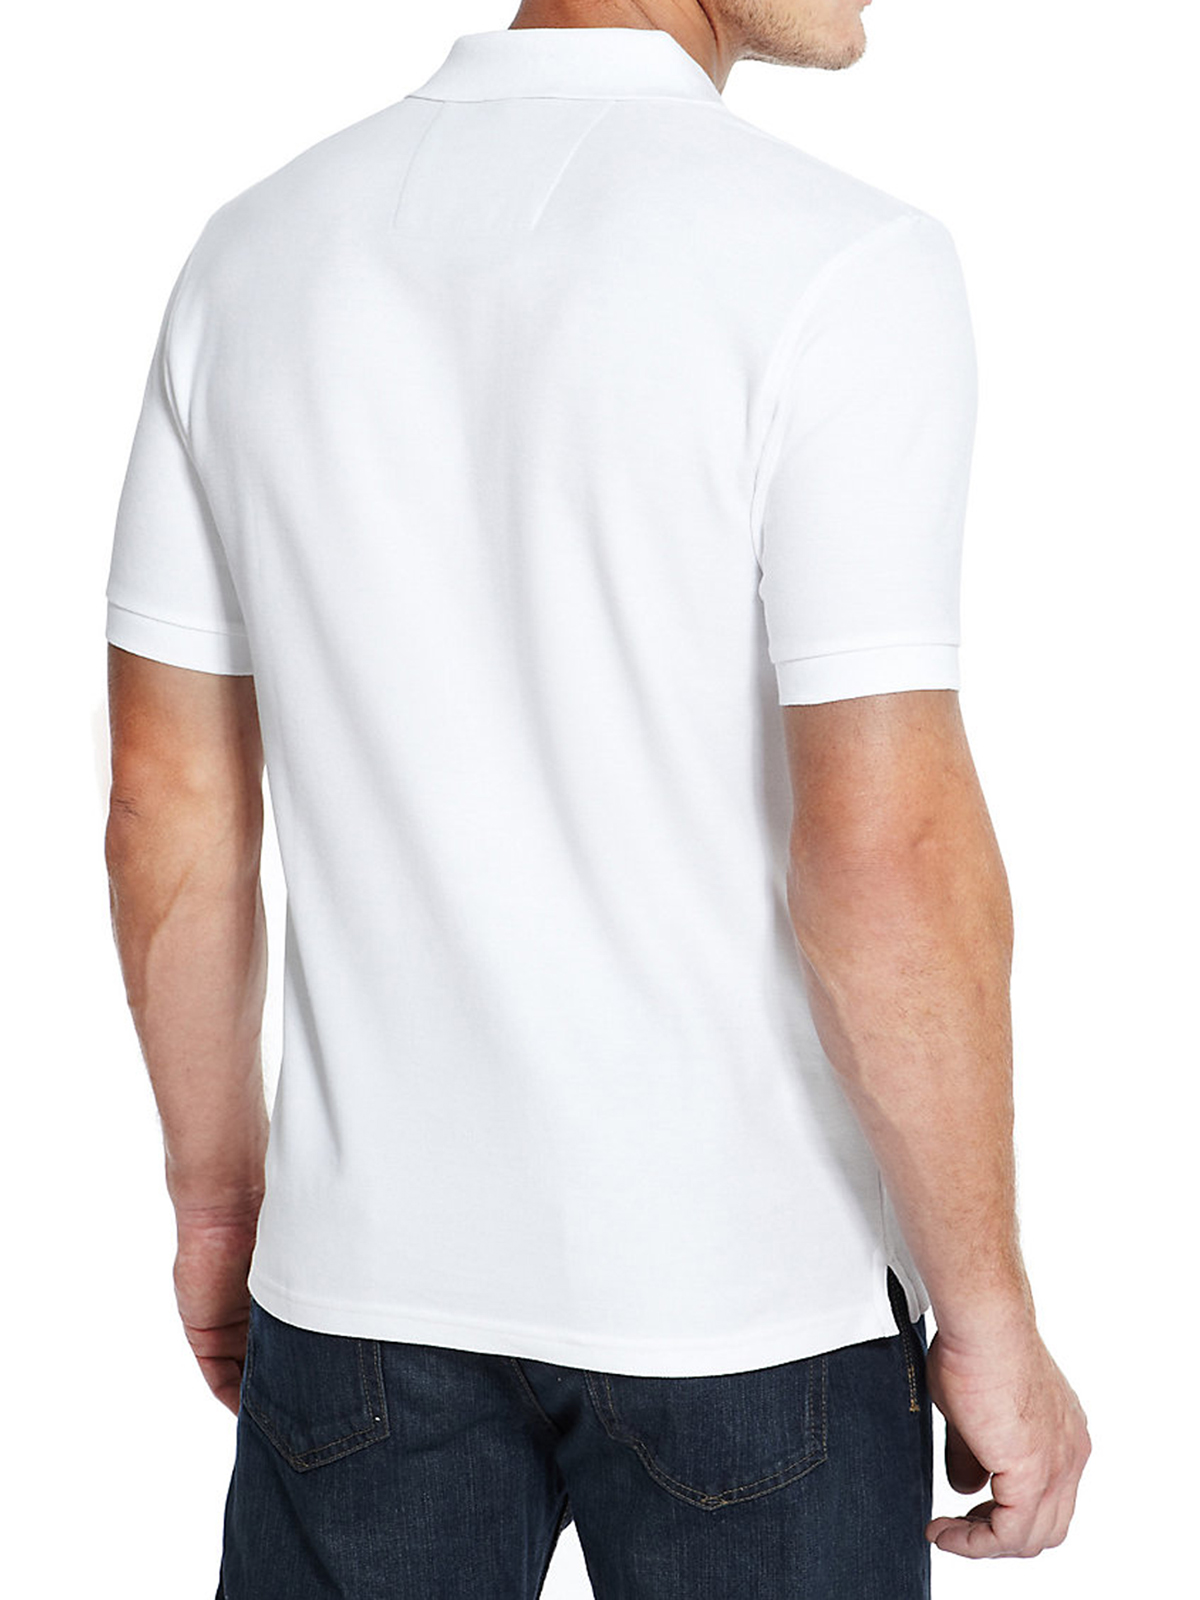 Marks and Spencer - - M&5 WHITE Pure Cotton StayNew Polo Shirt - Size ...